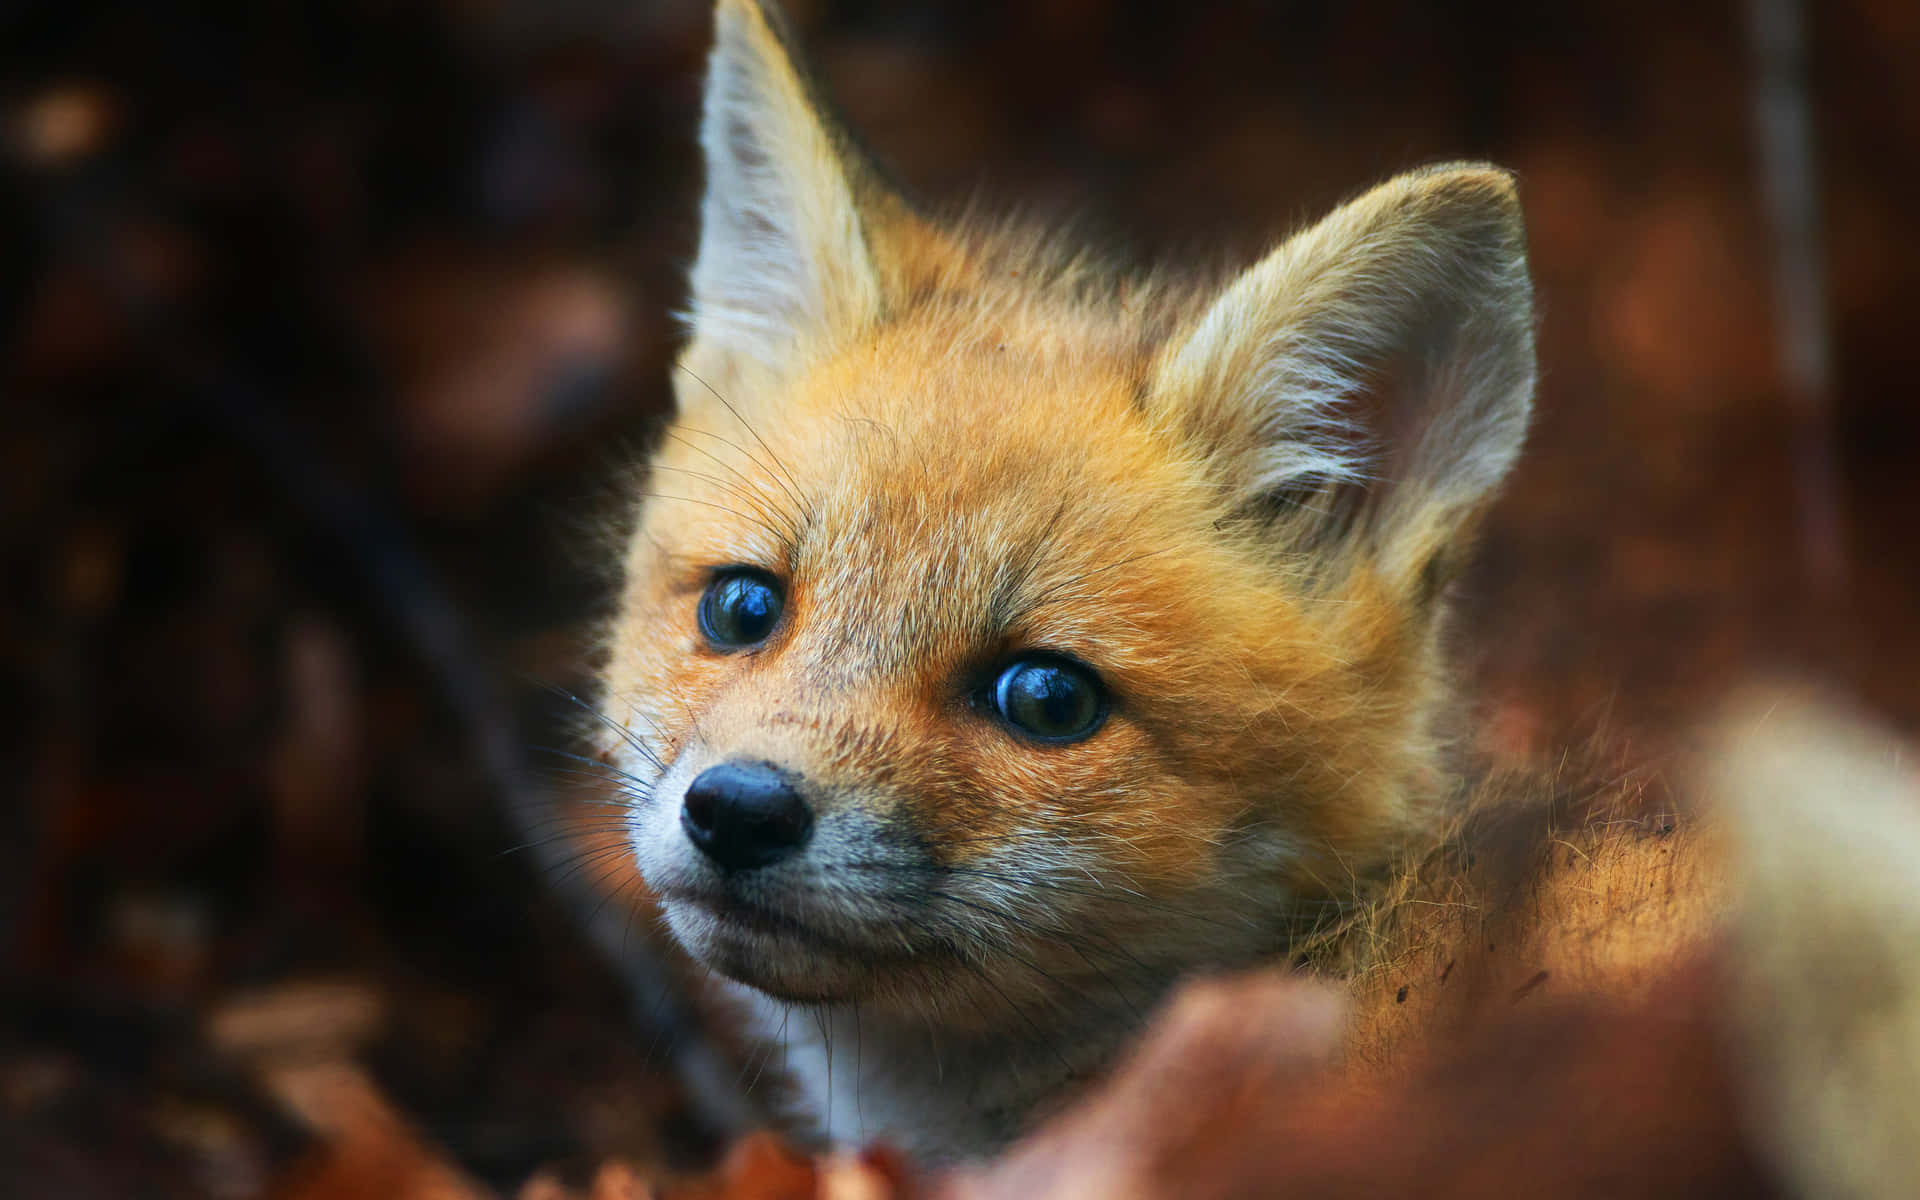 Don't forget to say hello to this cute fox!